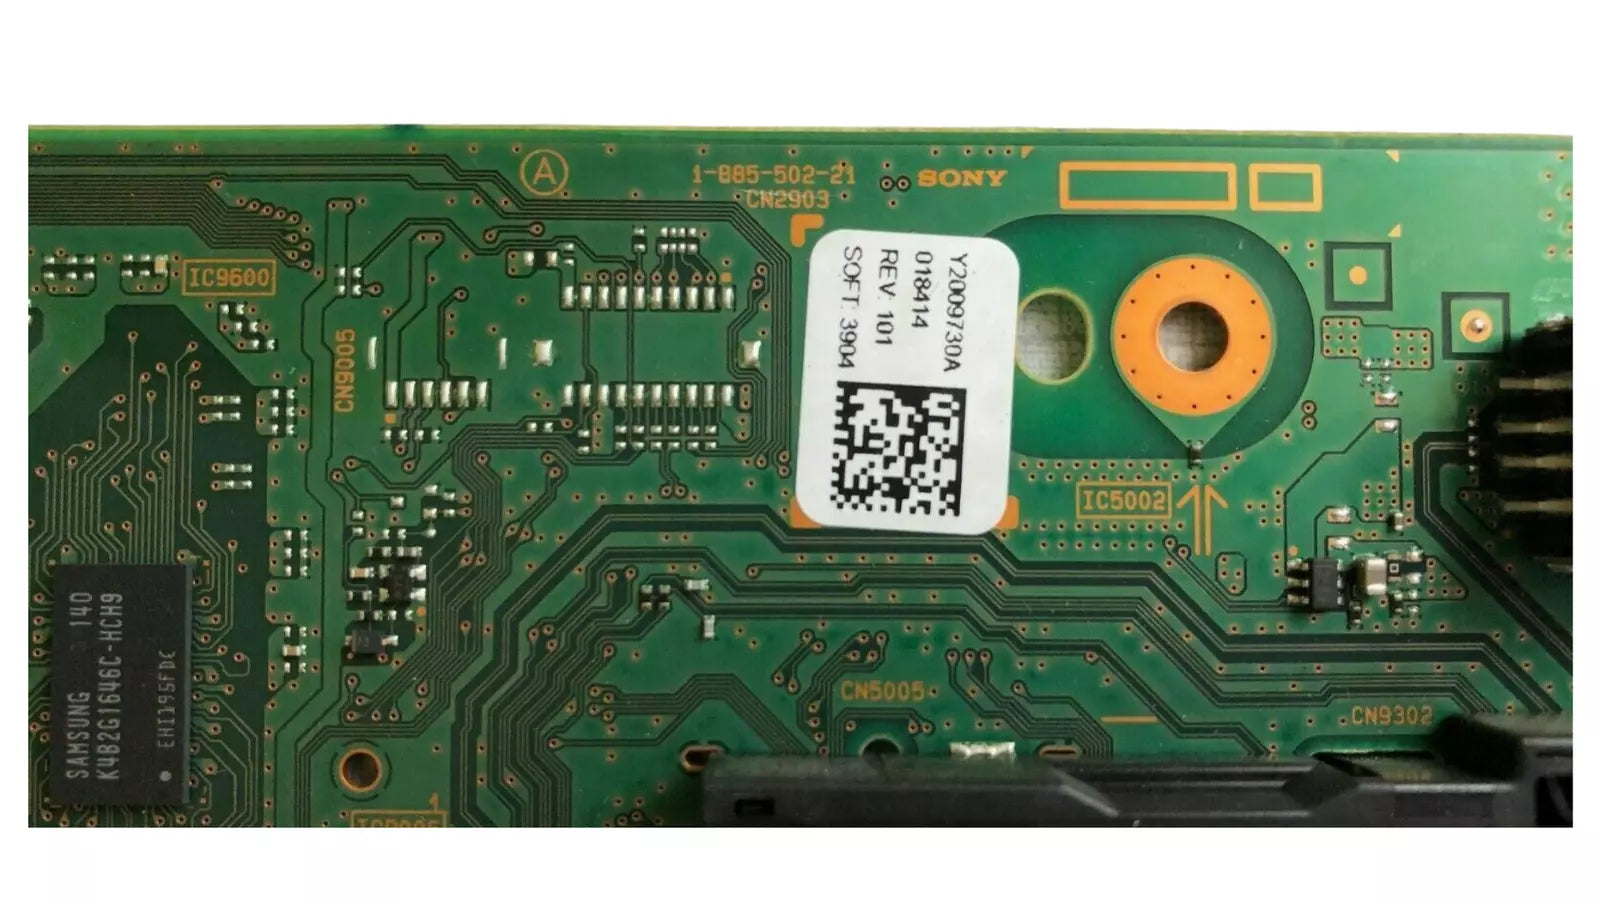 1-885-502-21 mainboard for Sony TV